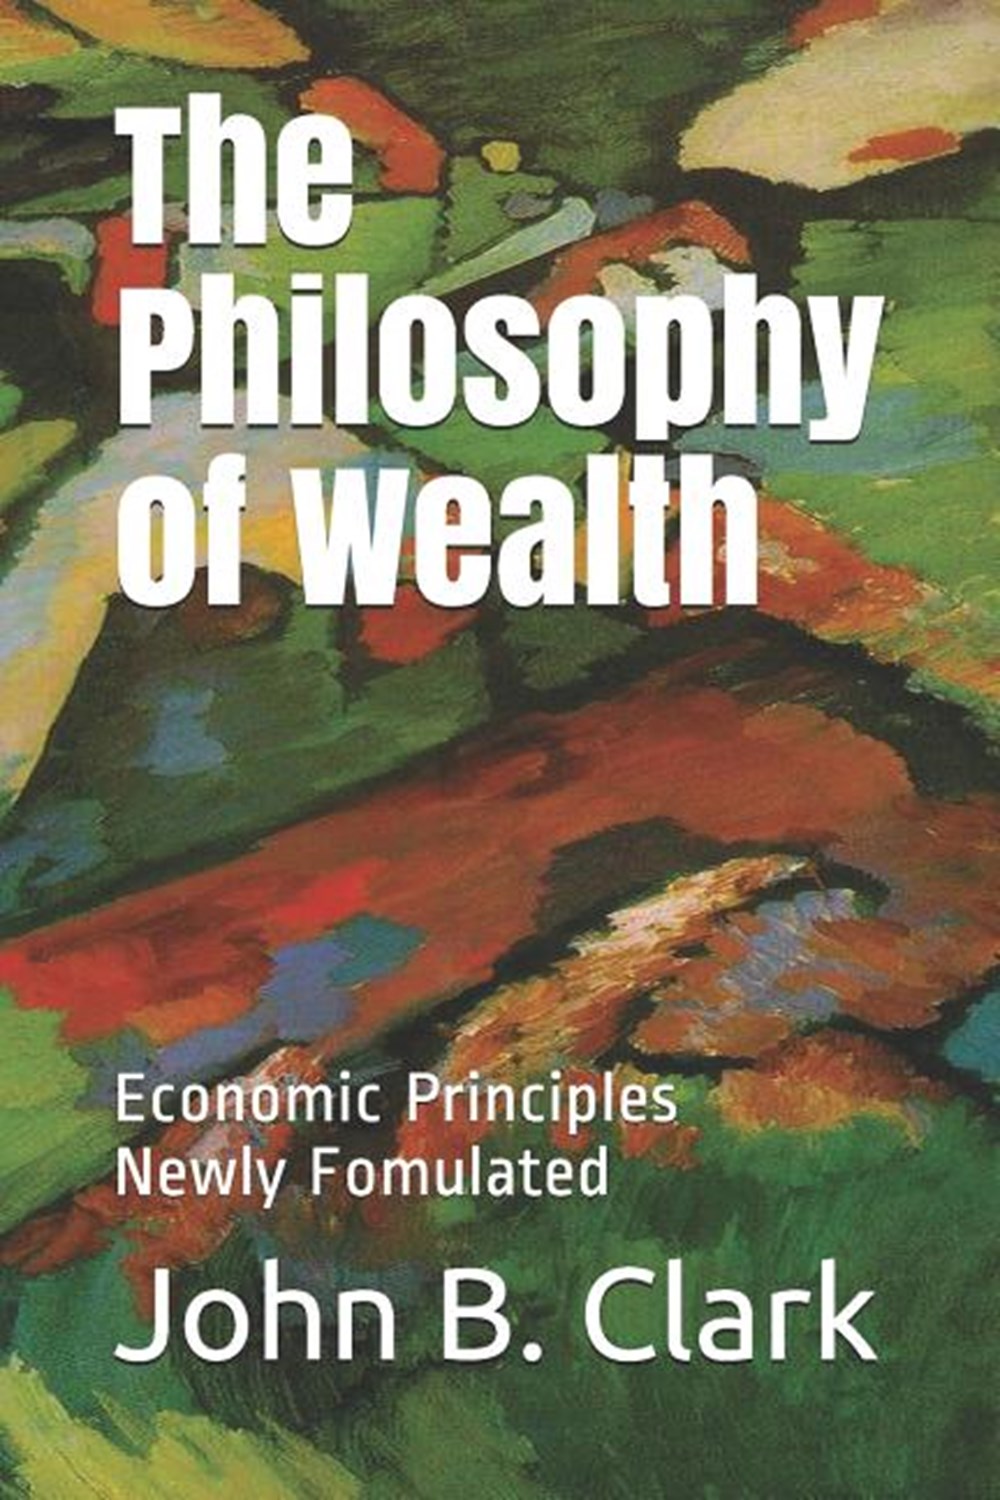 philosophy of wealth: Economic principles newly formulated